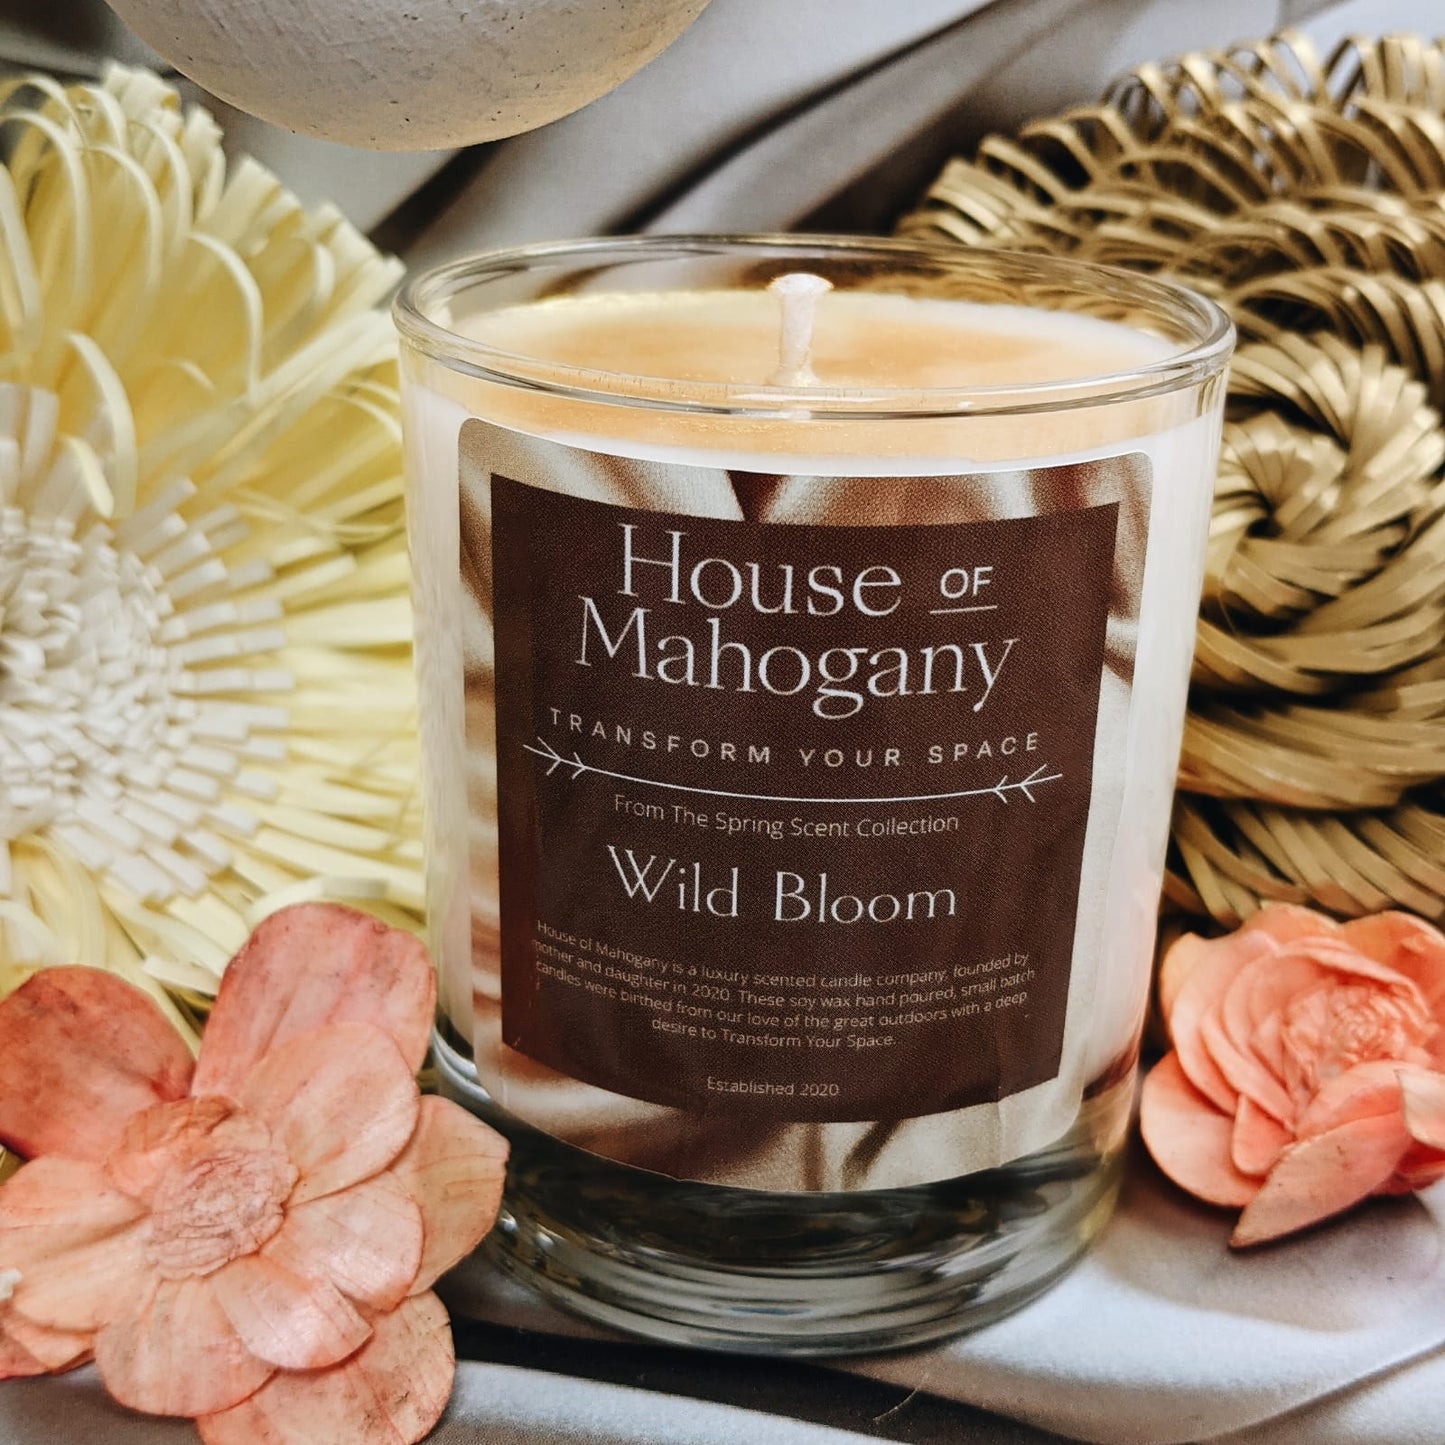 Wild Bloom Luxury Scented Candle